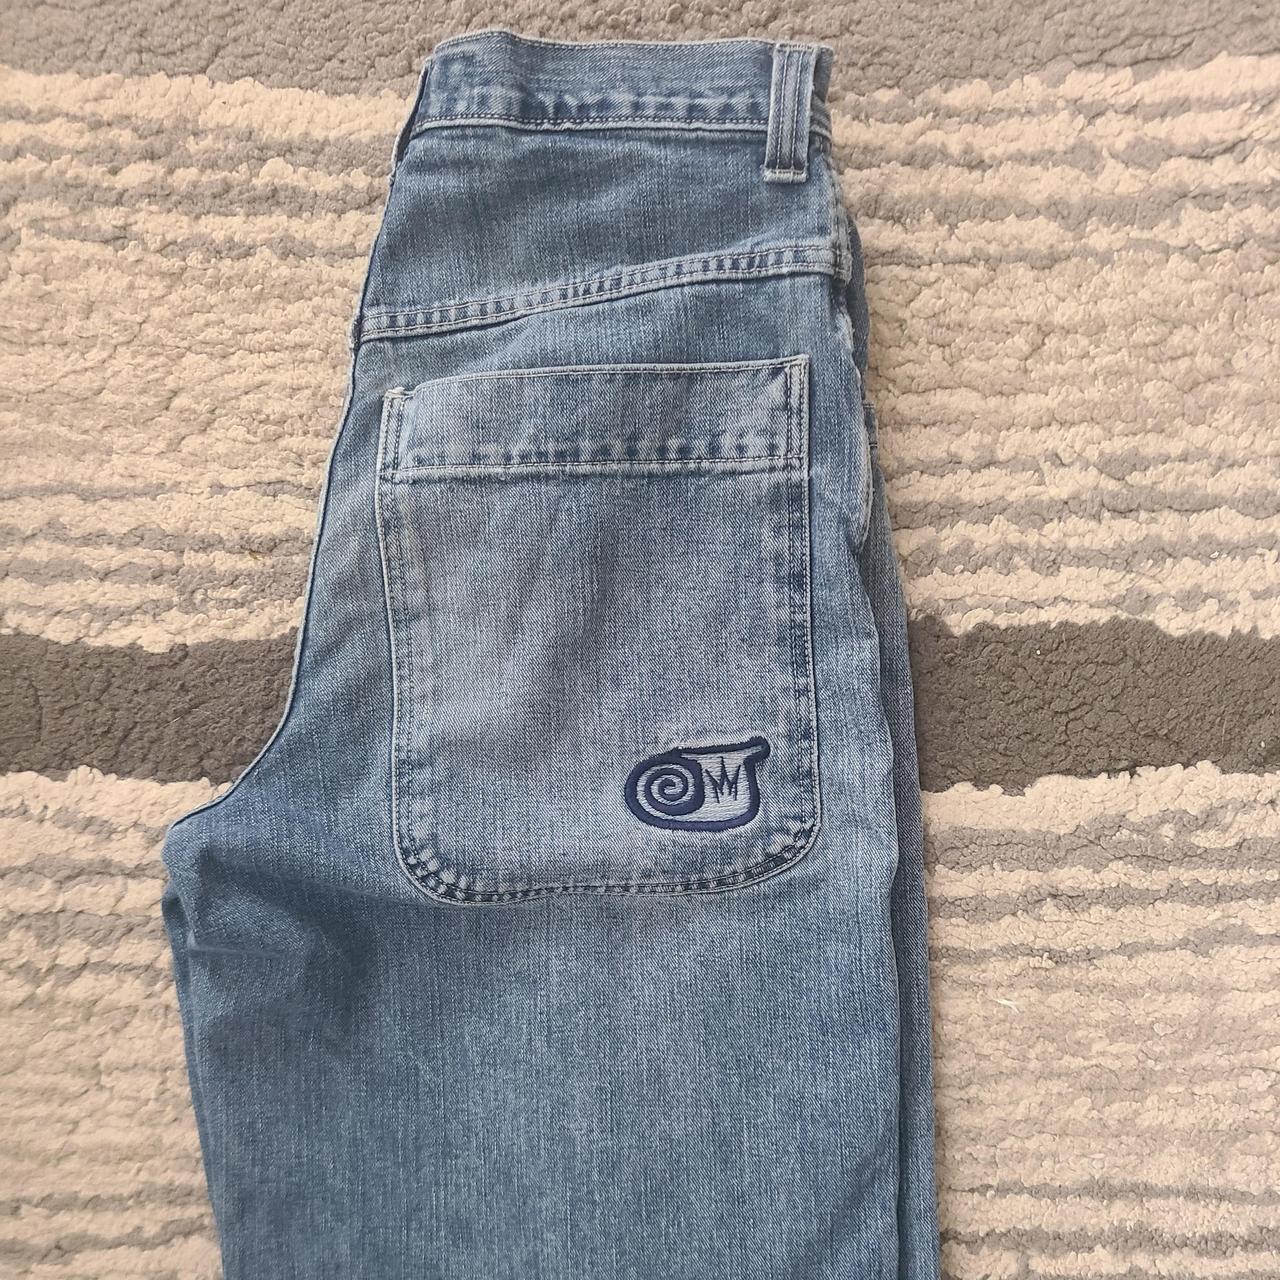 JNCO jorts, cropped twin cannons fit mad fat and go... - Depop